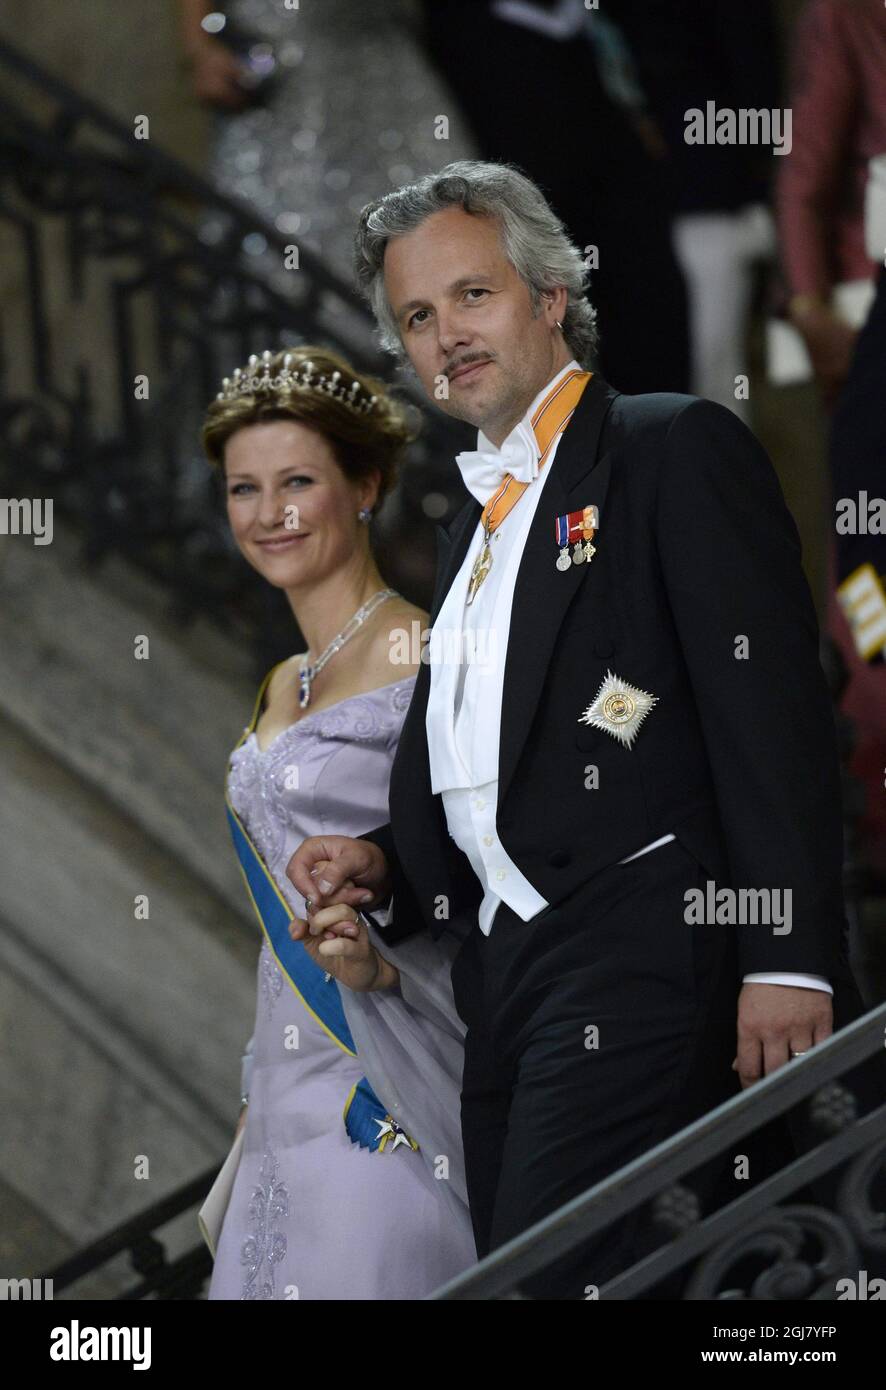 STOCKHOLM 20130608  Princess MÃ¤rtha Louise of Norway and Ari Behn leave after the wedding ceremony between Princess Madeleine of Sweden and Mr Christopher OÂ’Neill held at the Royal Chapel at the Royal Palace of Stockholm on Saturday June 8, 2013.  Foto: Leif R Jansson / SCANPIX / kod 10020 Stock Photo